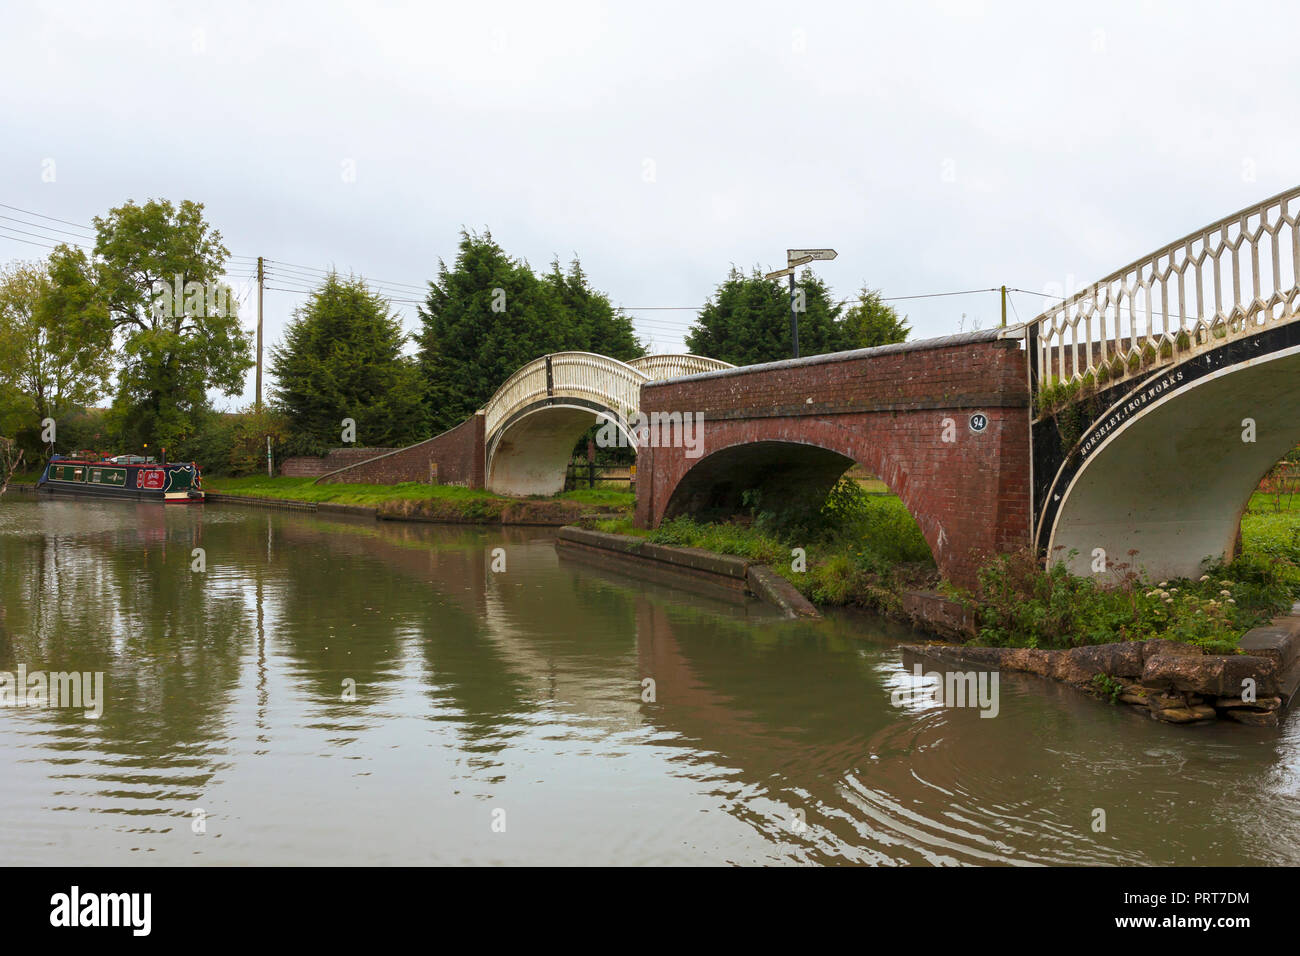 The bridges at Braunston Turn, junction of the Grand Union and Oxford Canals, Braunston, Northamptonshire, England, UK Stock Photo